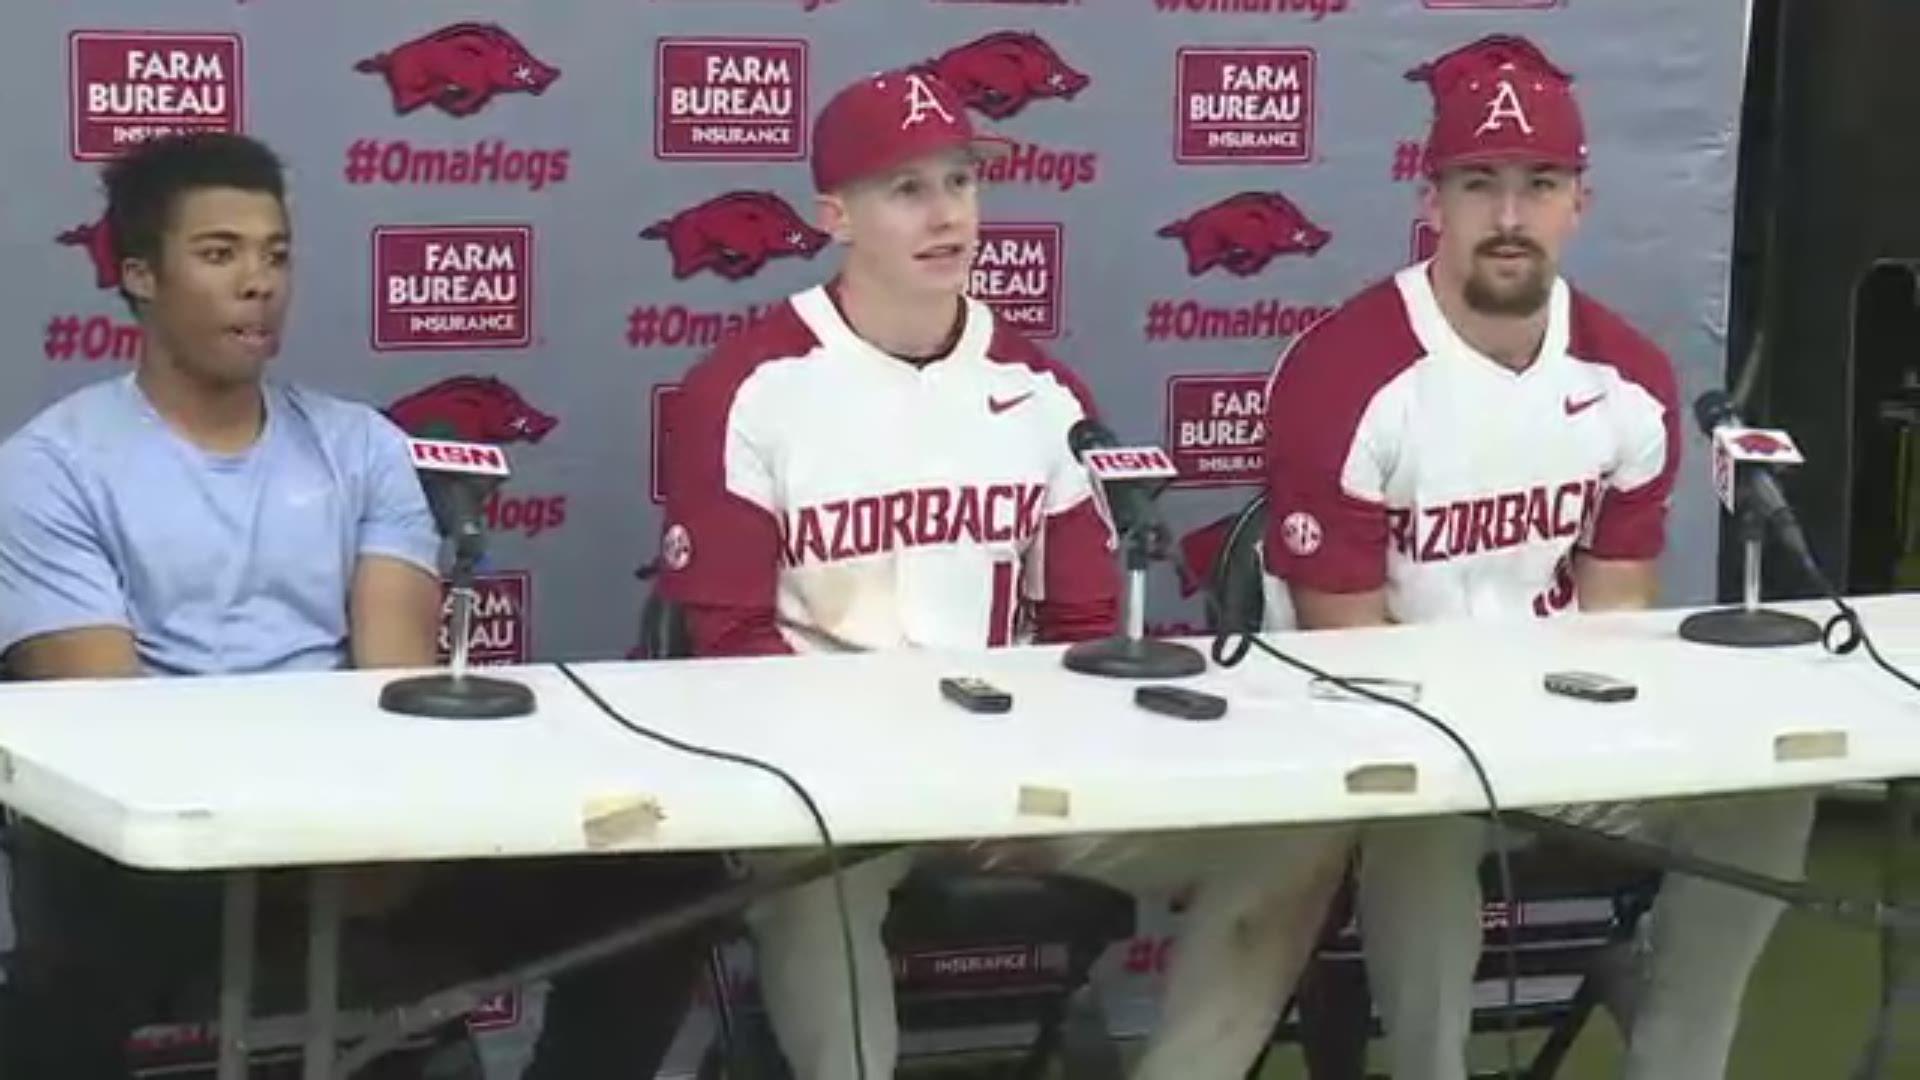 Franklin and Kjerstad combined to drive in all five Arkansas runs in Friday's 5-1 win over Eastern Illinois.